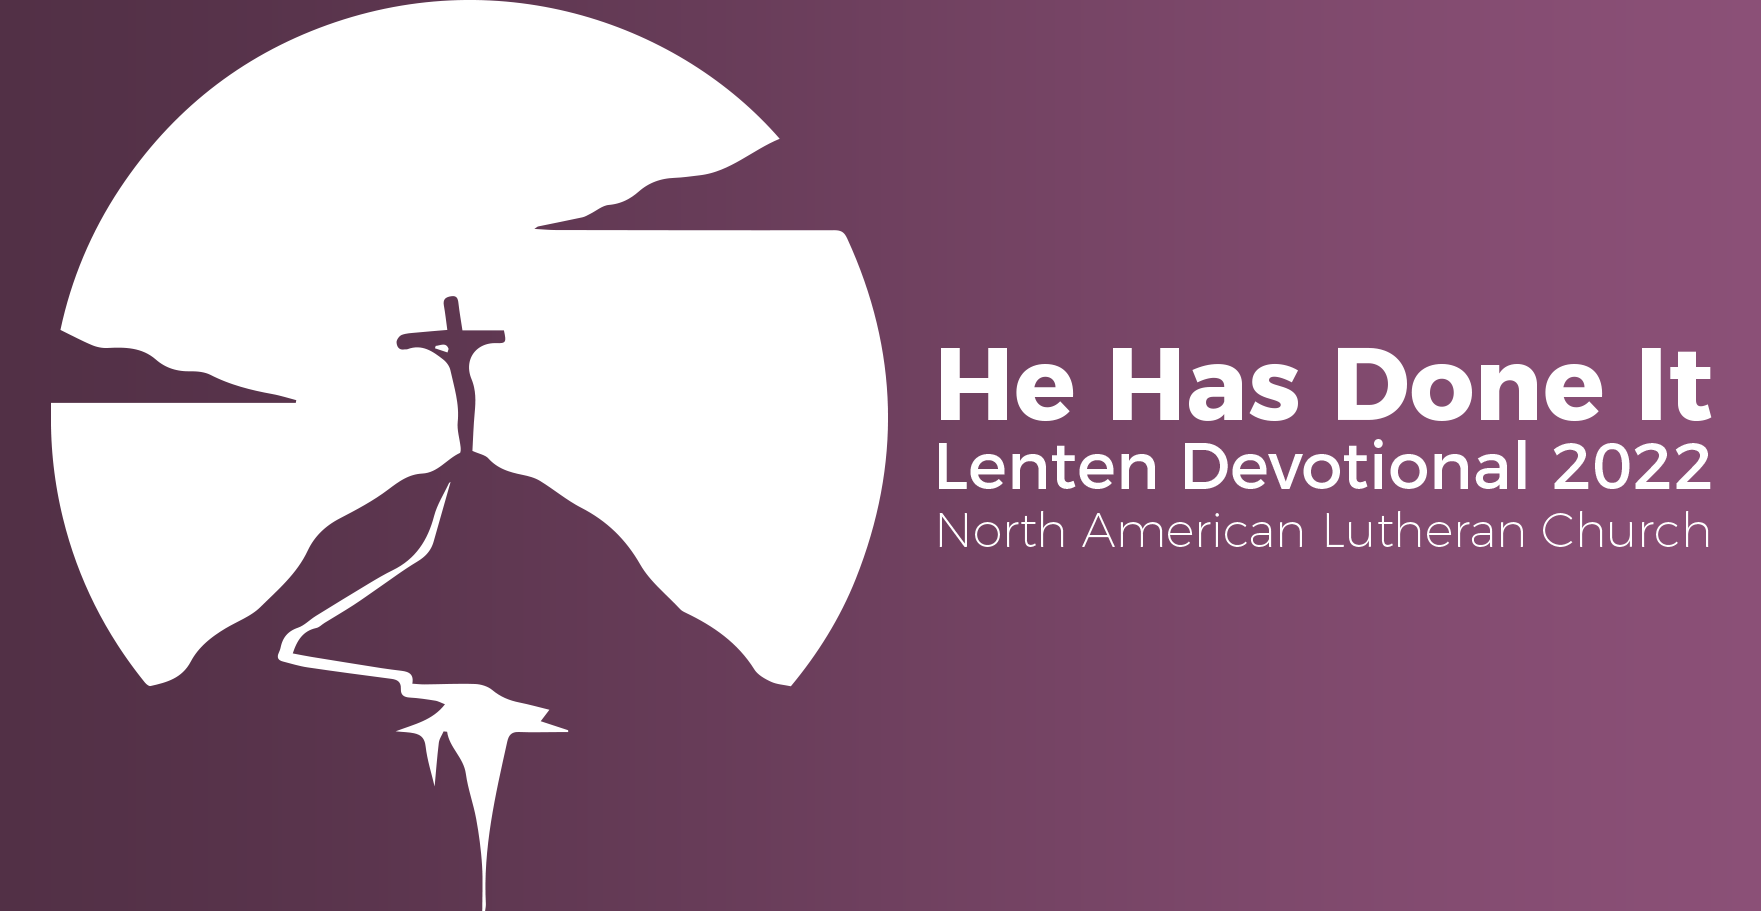 March 10, 2022 | Thursday of the Week of Lent I